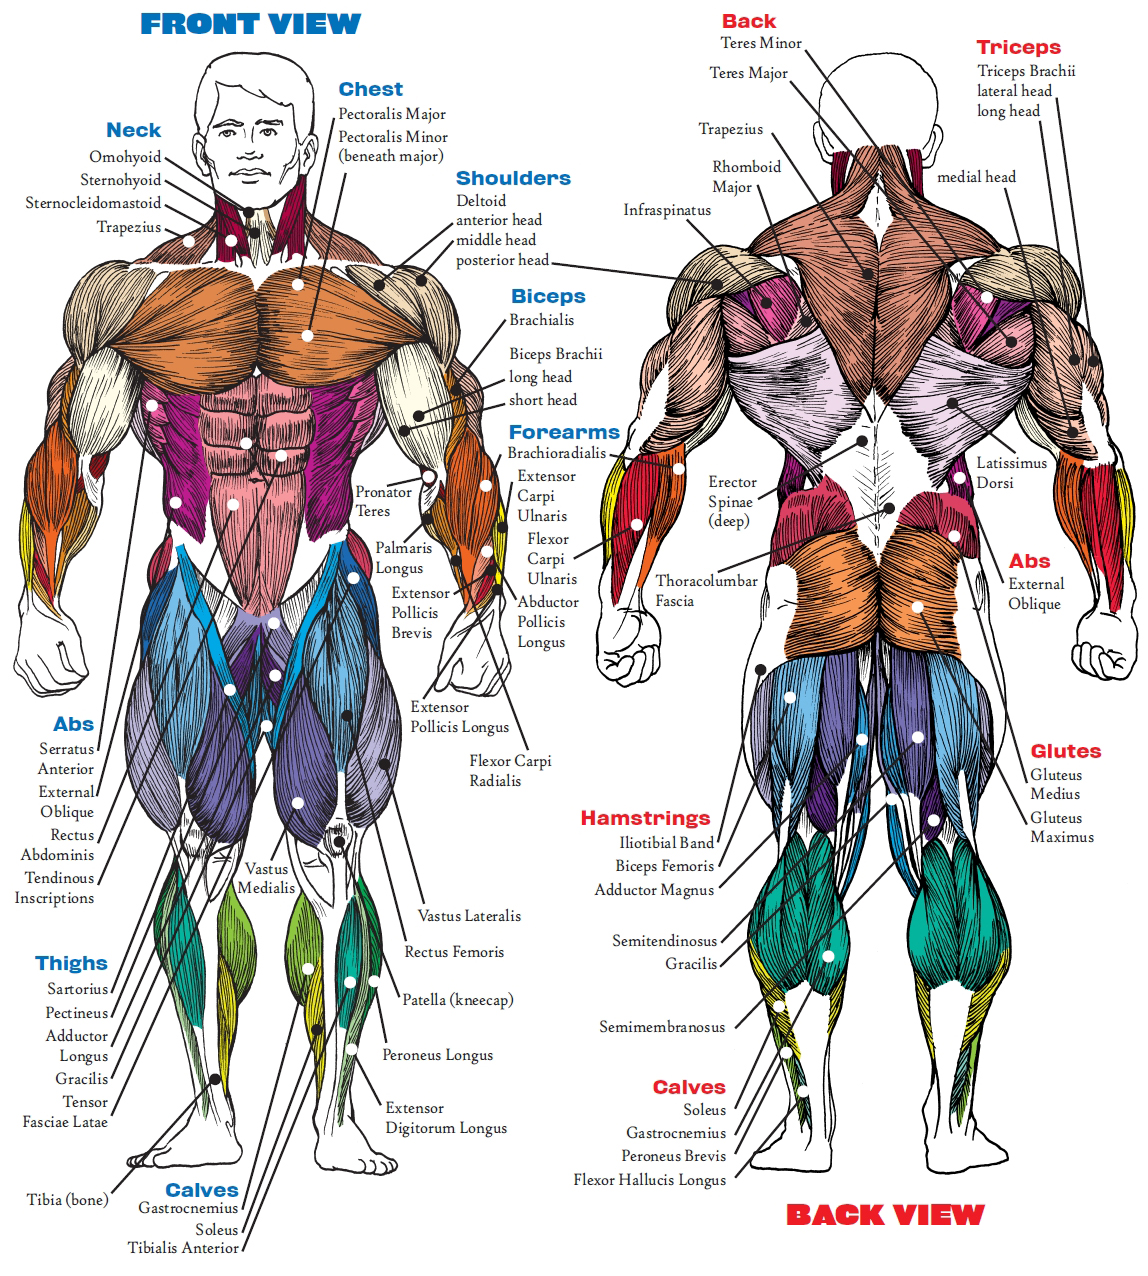 Body Muscle Diagram And Names / Muscles Chart Description Muscular Body ...